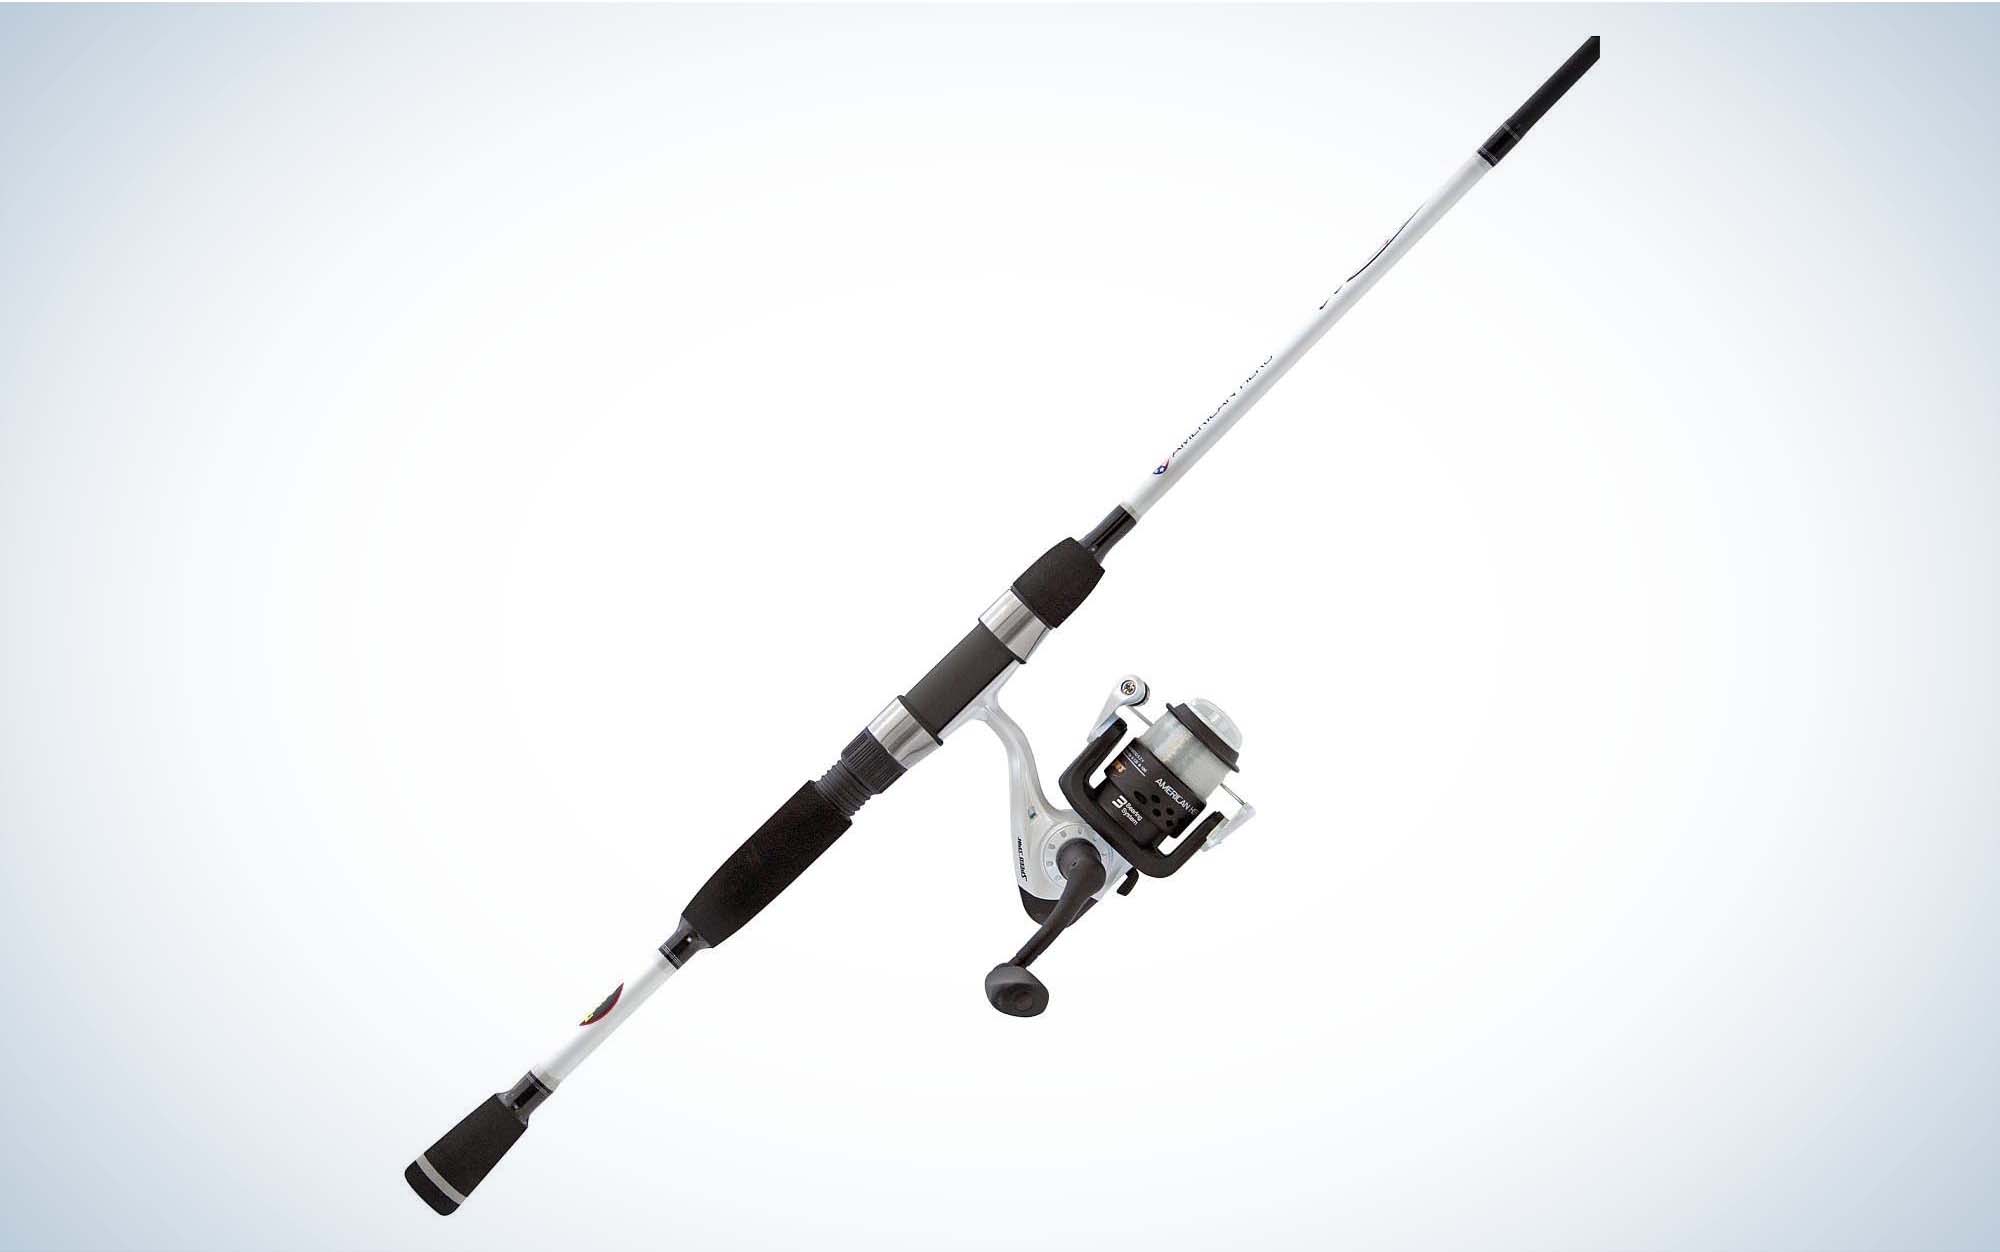 ZEBCO Casting Combos, Rod & Reel Combos, Fishing